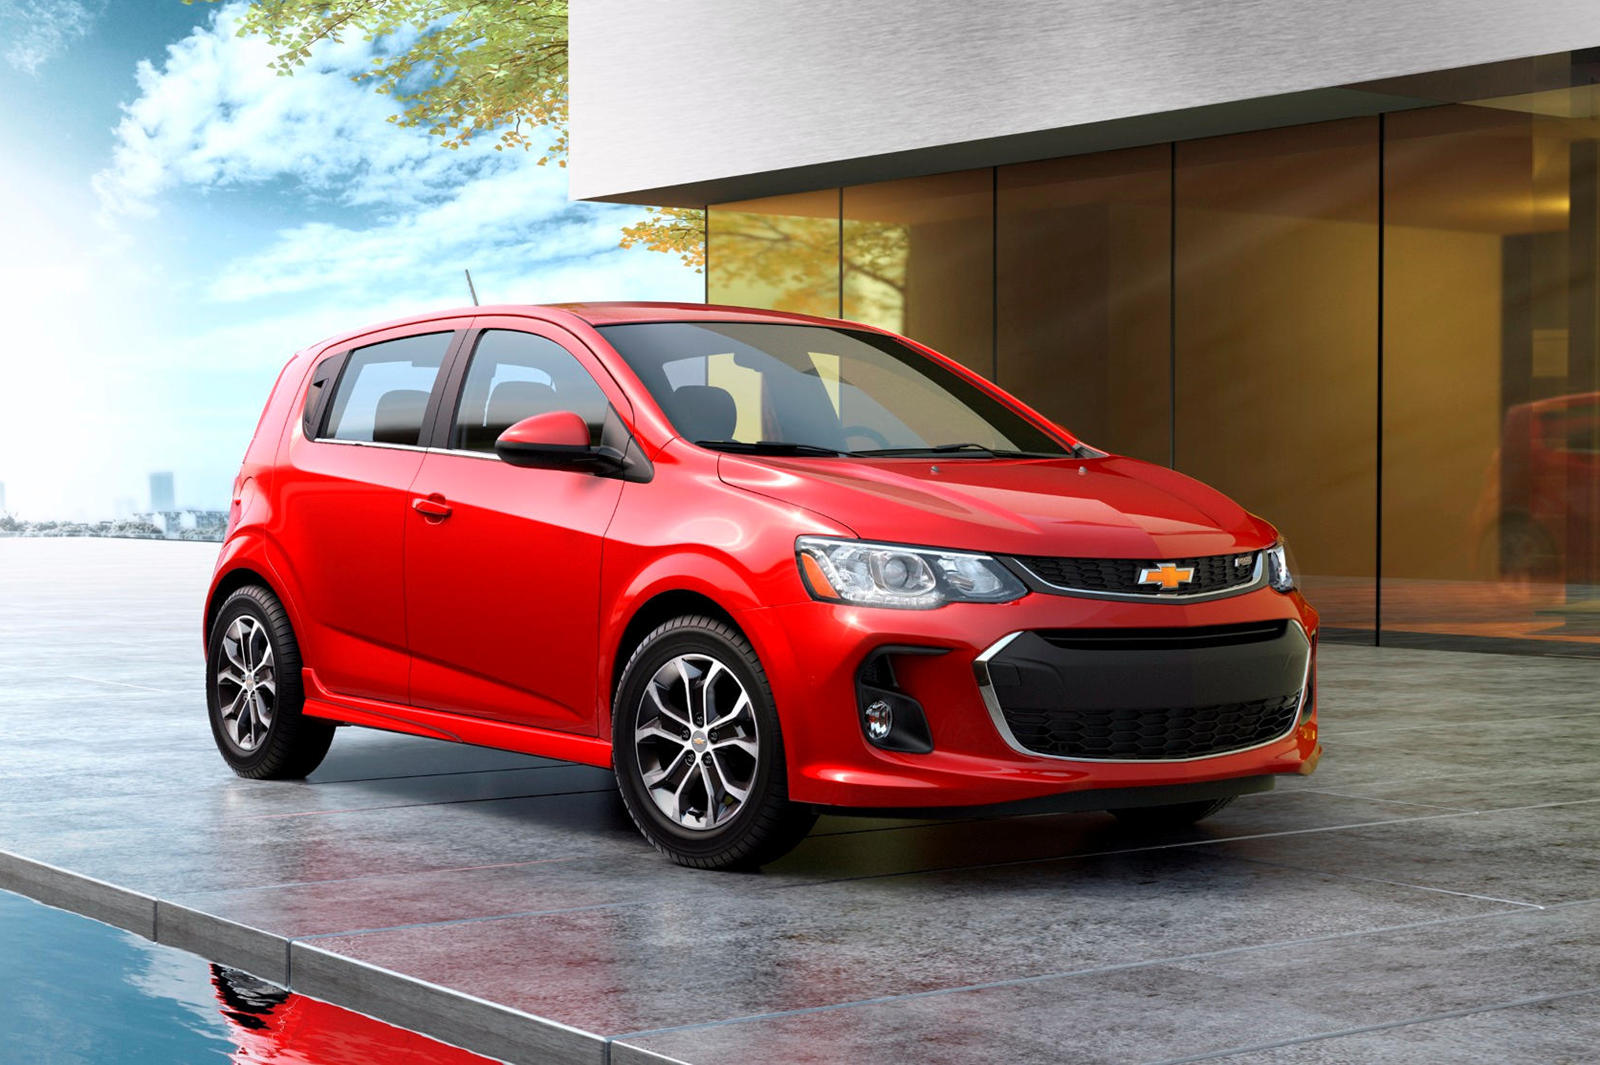 2017 Chevrolet Sonic Hatchback Front Angle View